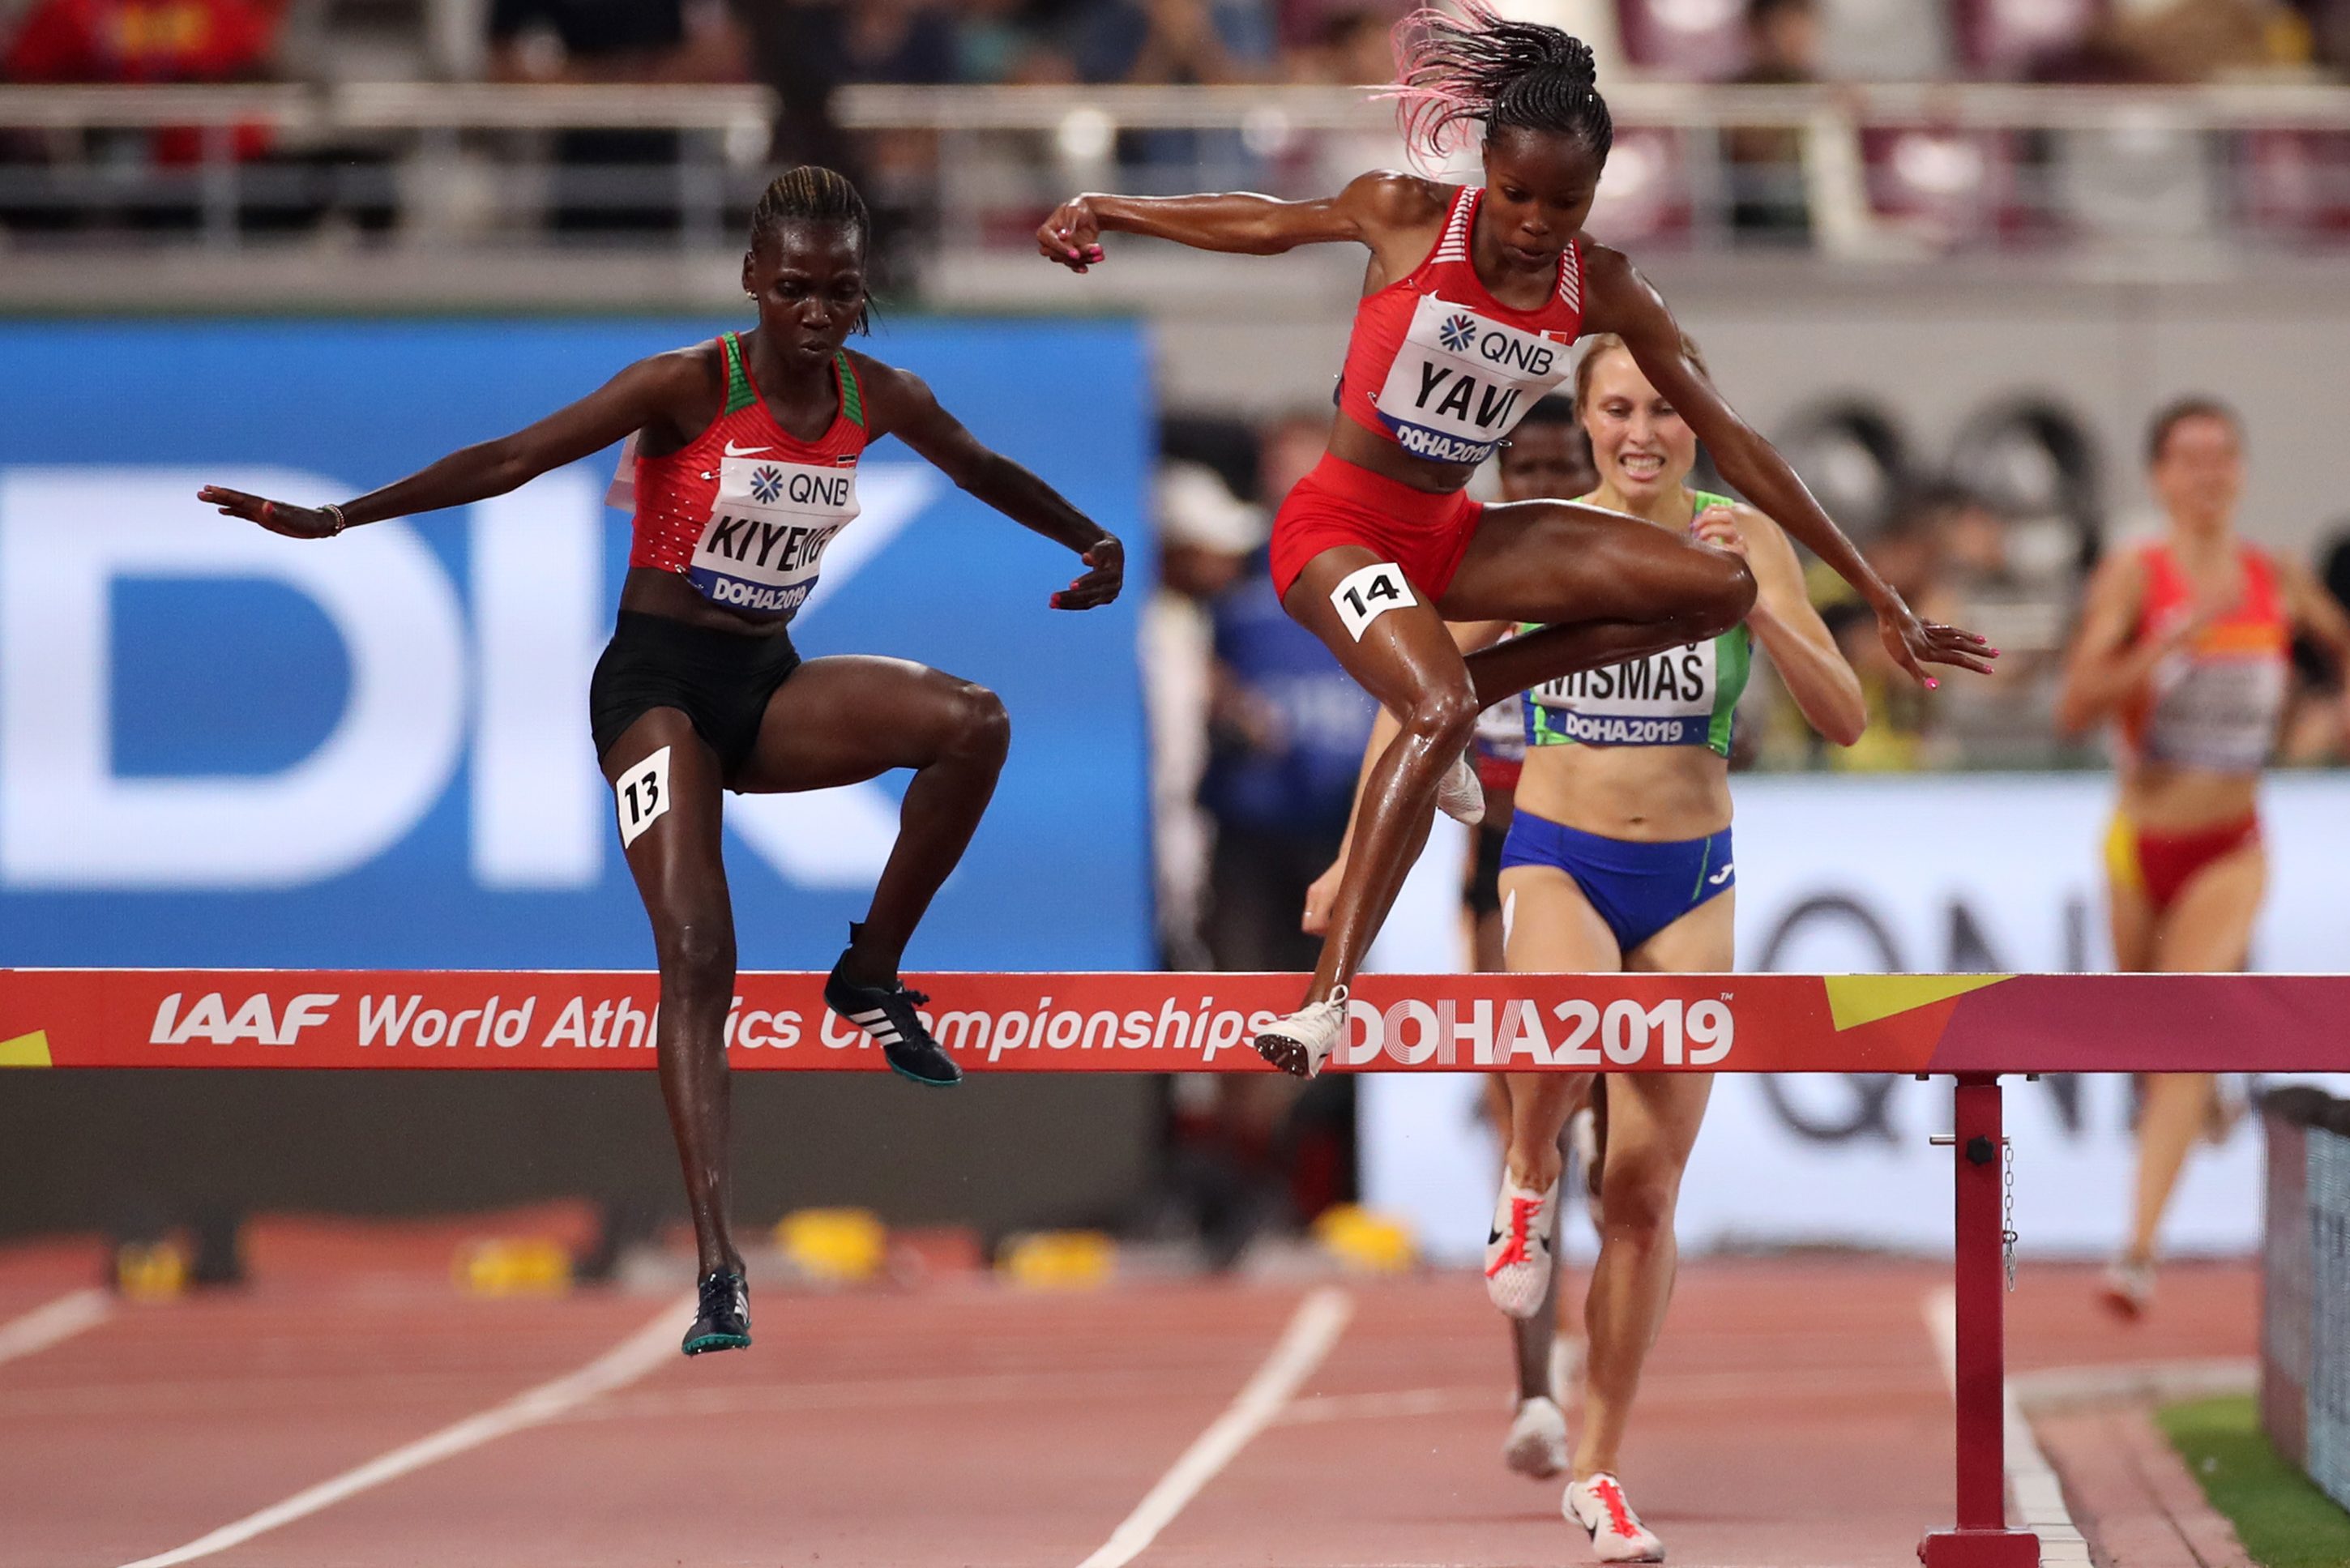 Winfred Mutile Yavi of Bahrain (C) and Hyvin Kiyeng of Kenya (L) compete in the Women's 3000 meter Steeplechase heats on Sept. 27, the first day of 17th IAAF World Athletics Championships in Doha, Qatar. (Christian Petersen/Getty Images)